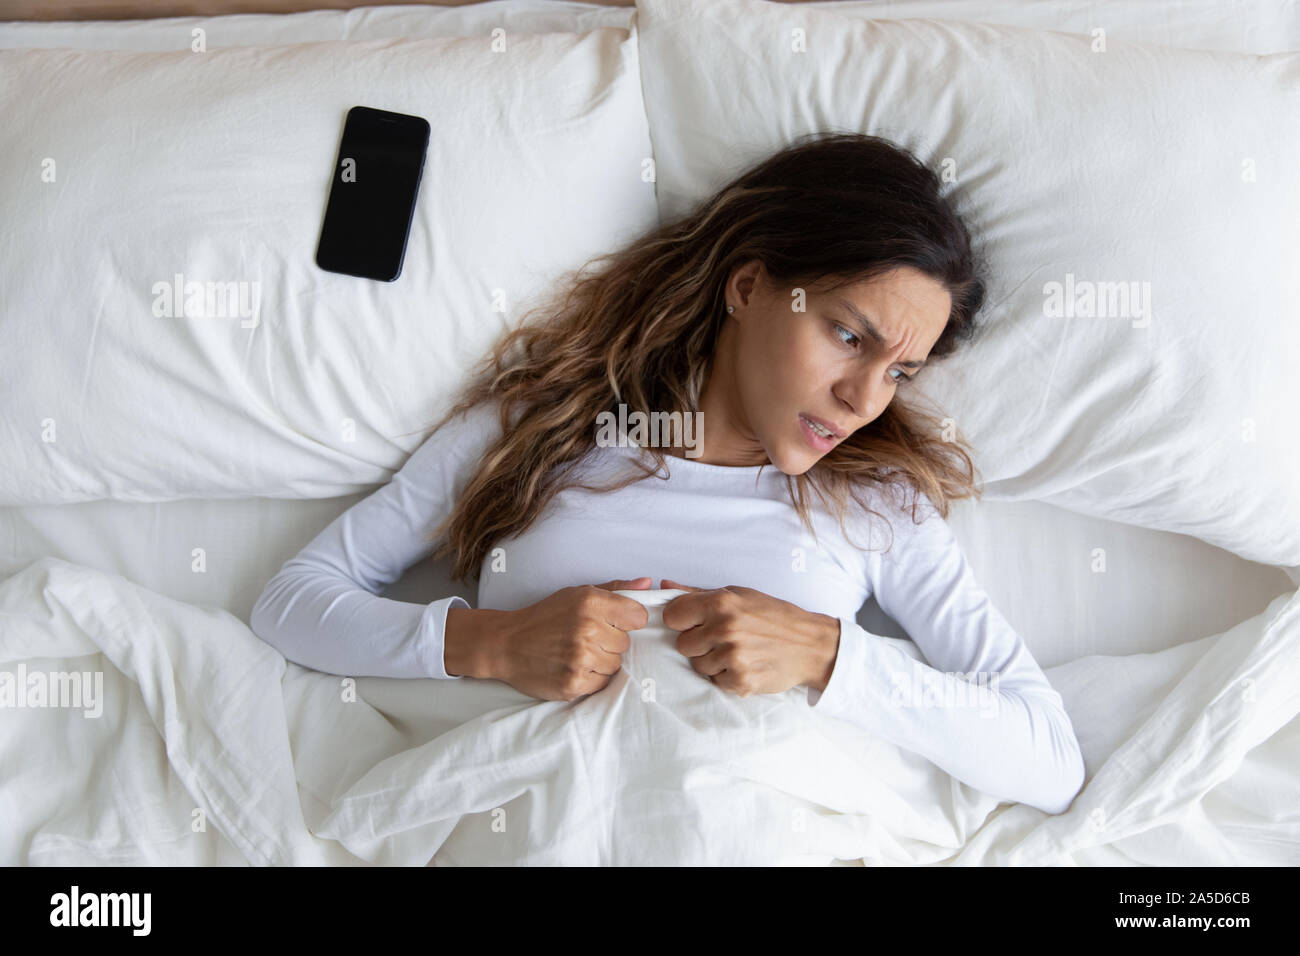 Irritated millennial mixed race woman waking up after cellphone alarm. Stock Photo